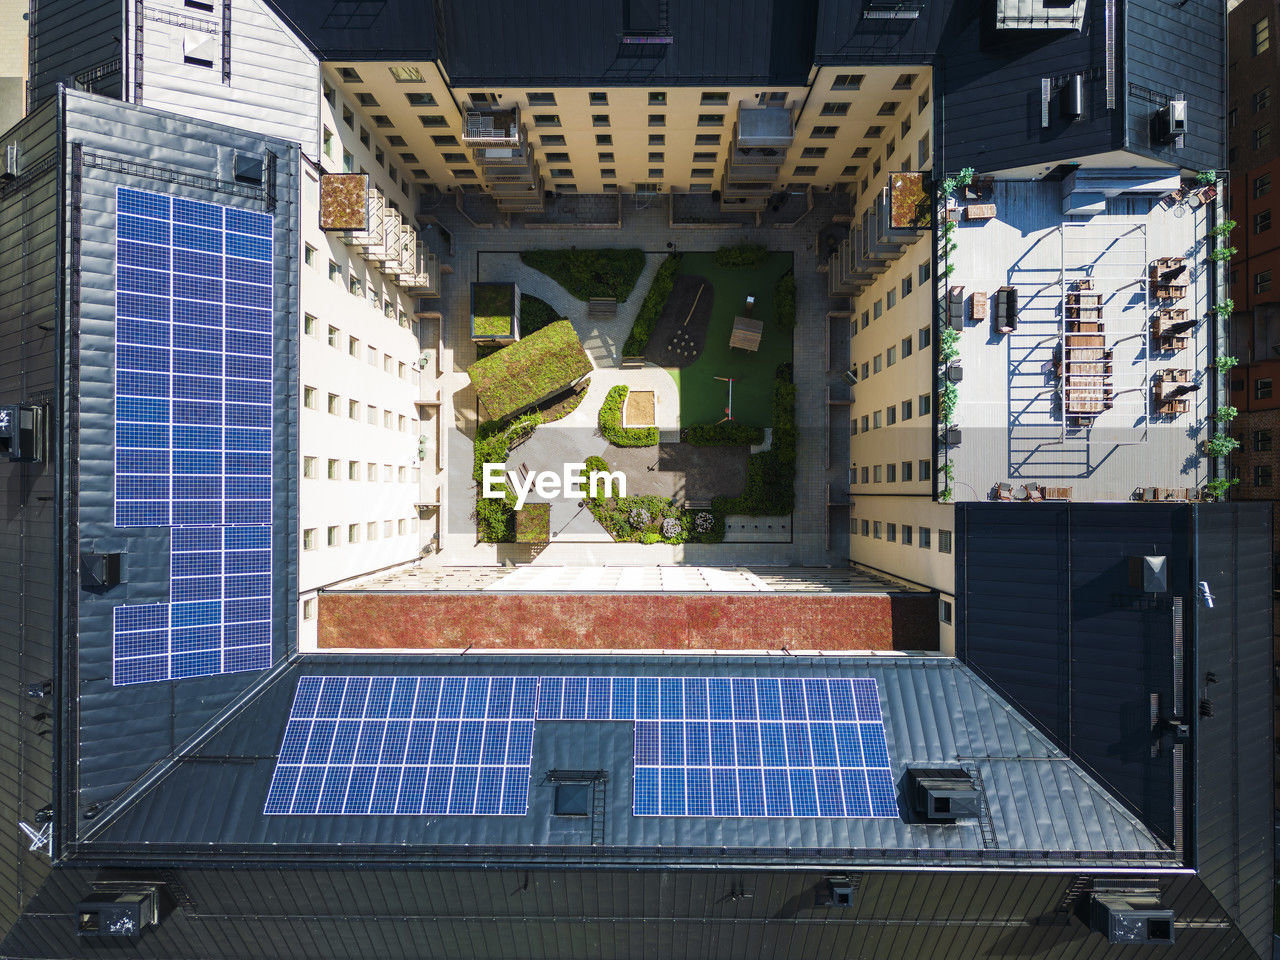 Aerial vie of courtyard surrounded by block of flats, solar panels on roof